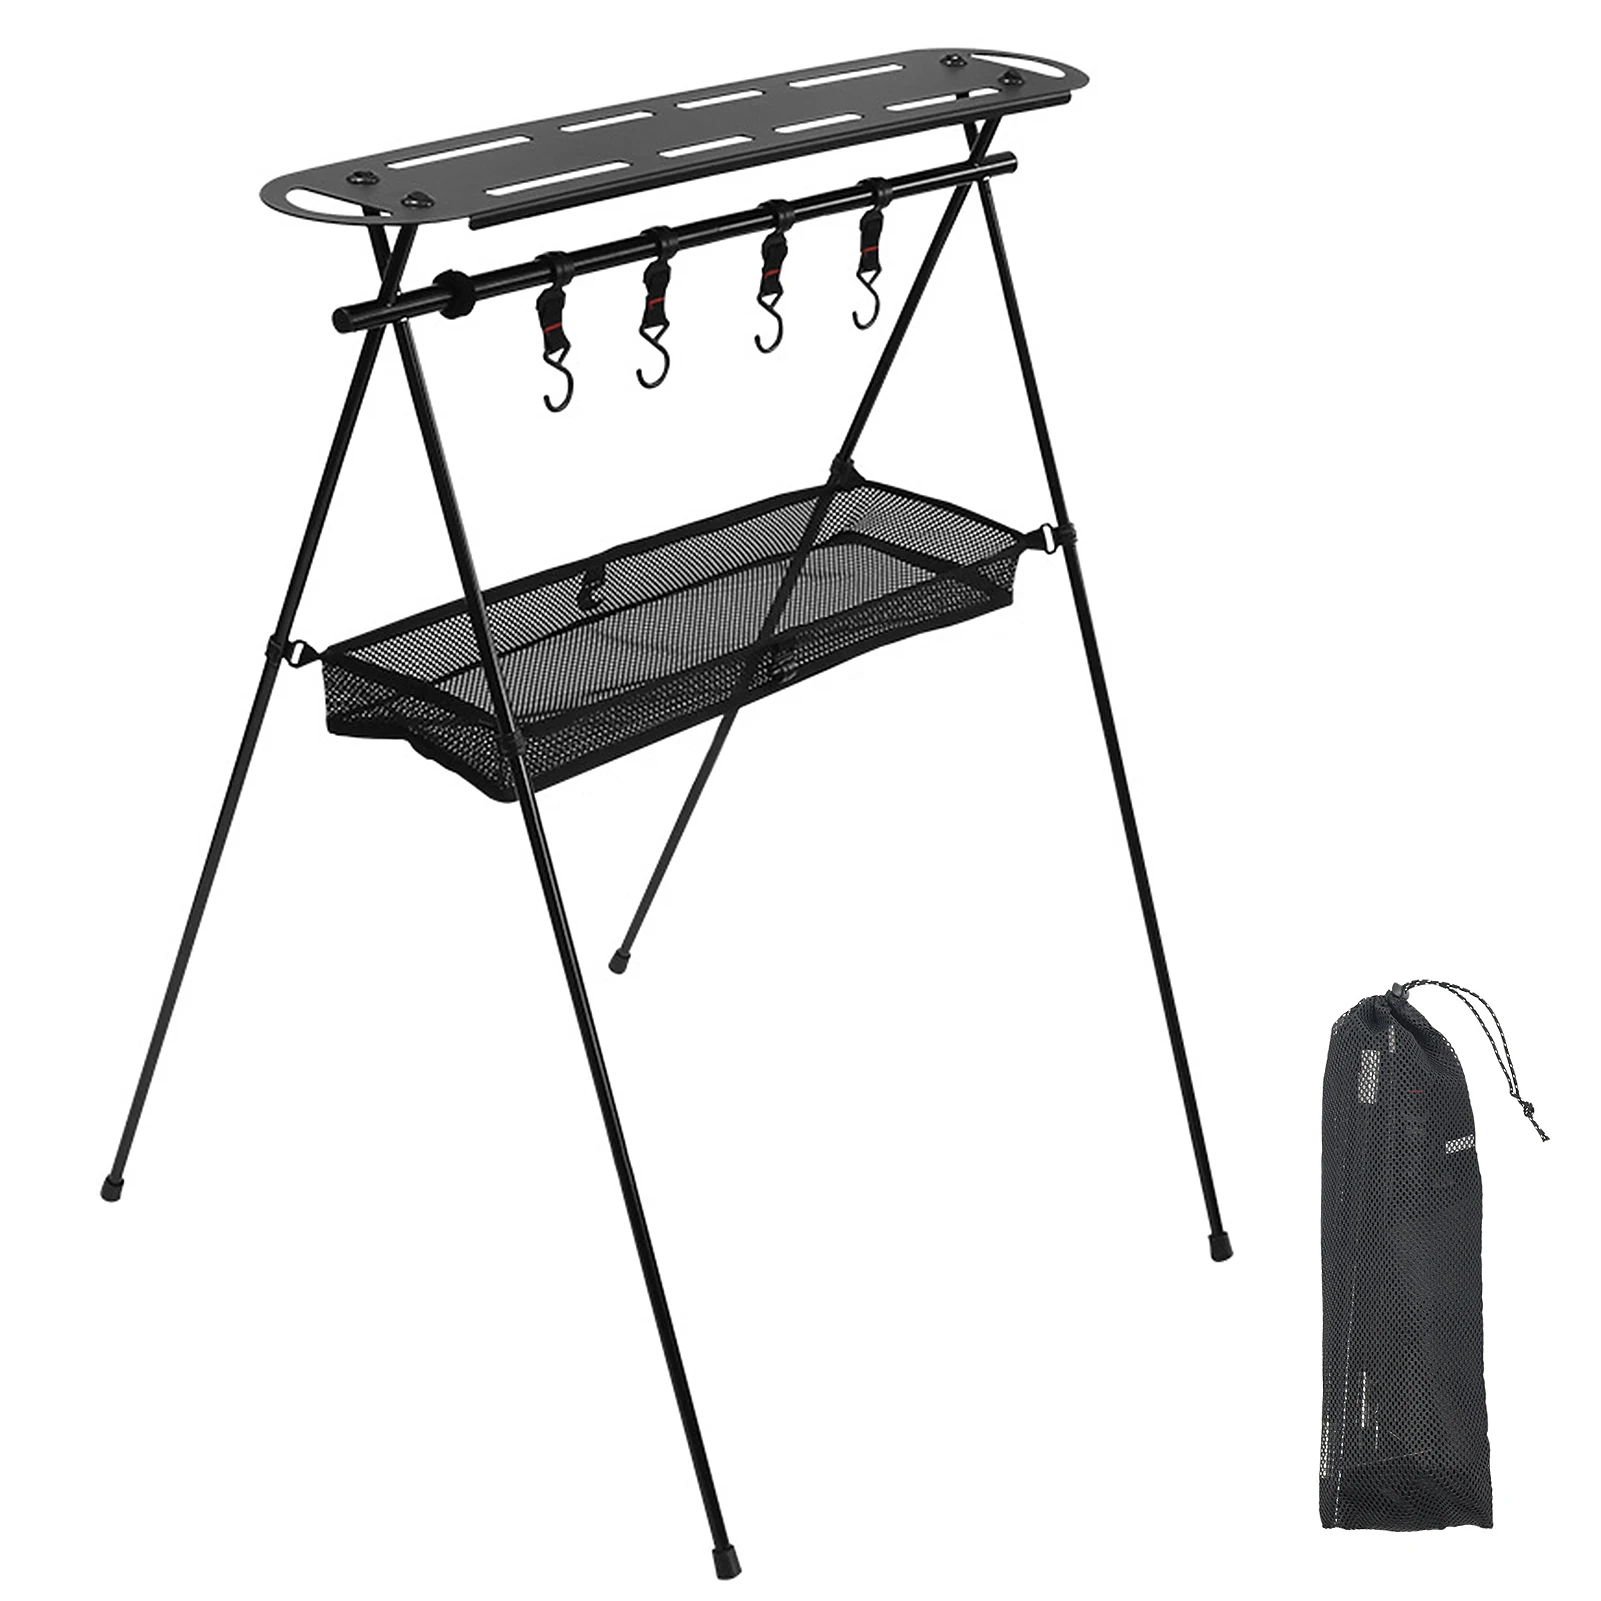 Camping Collapsible Hanging Rack Shelf Portable Picnic Cookware Hanger Stand Rack Storage Organizer with Top Plate Hooks